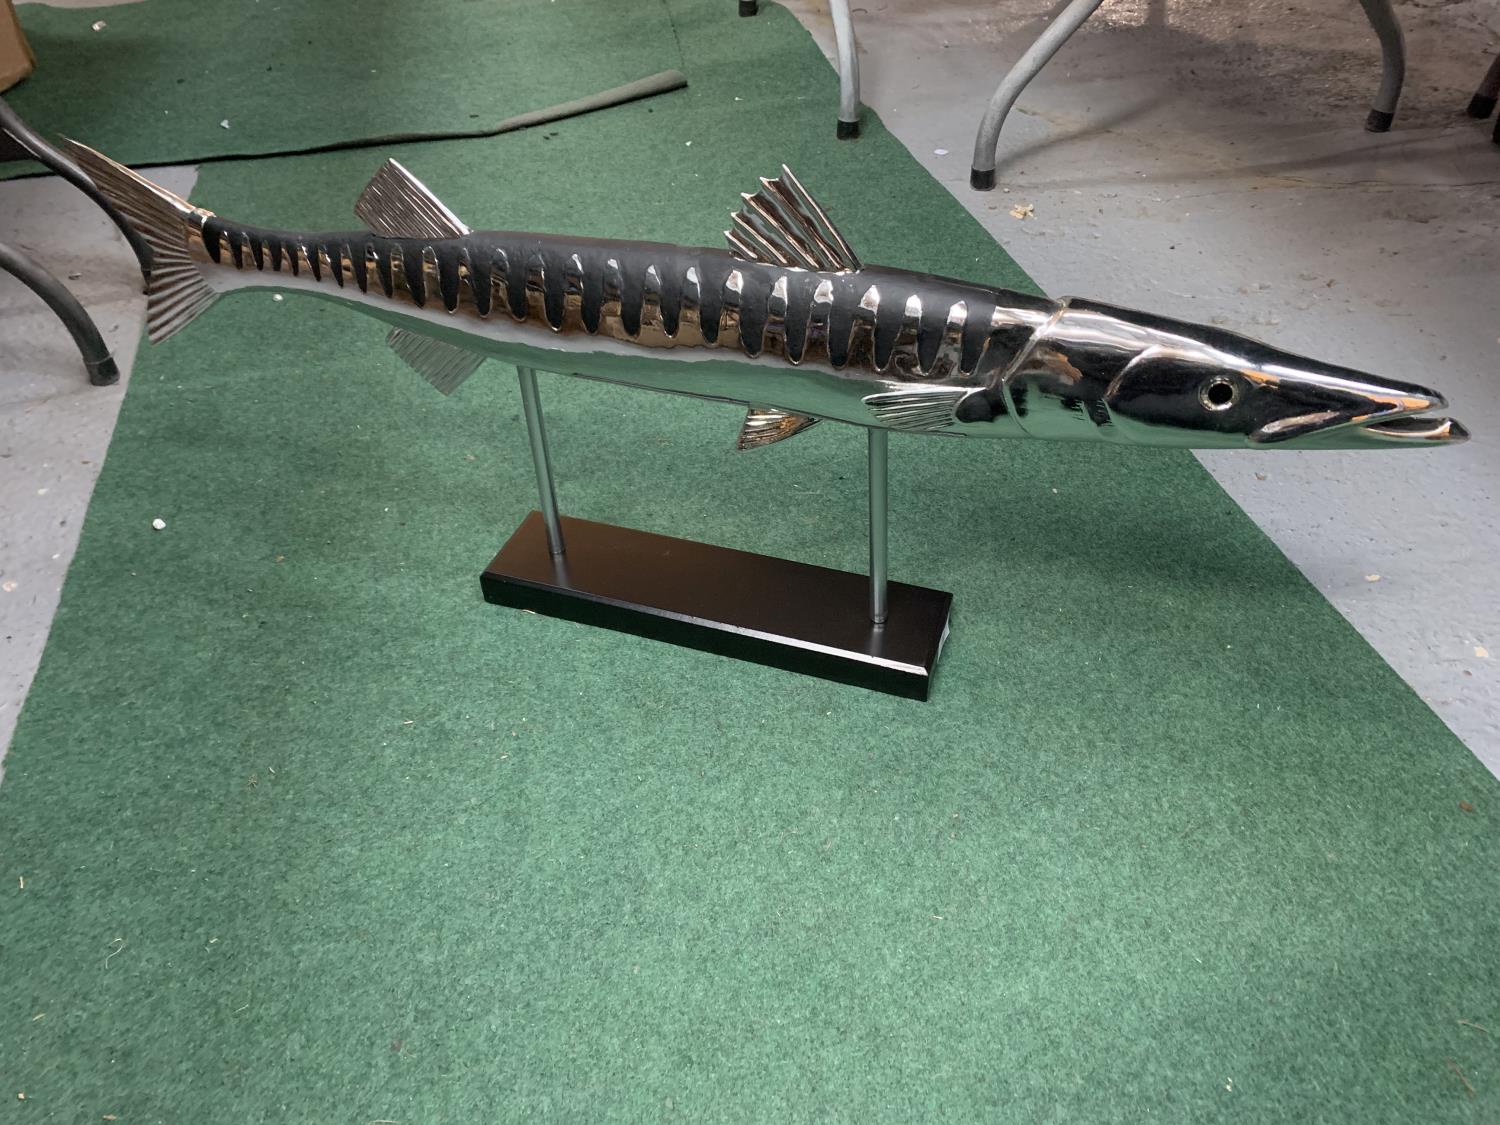 A CHROME BARRACUDA FISH ON STAND - Image 2 of 3